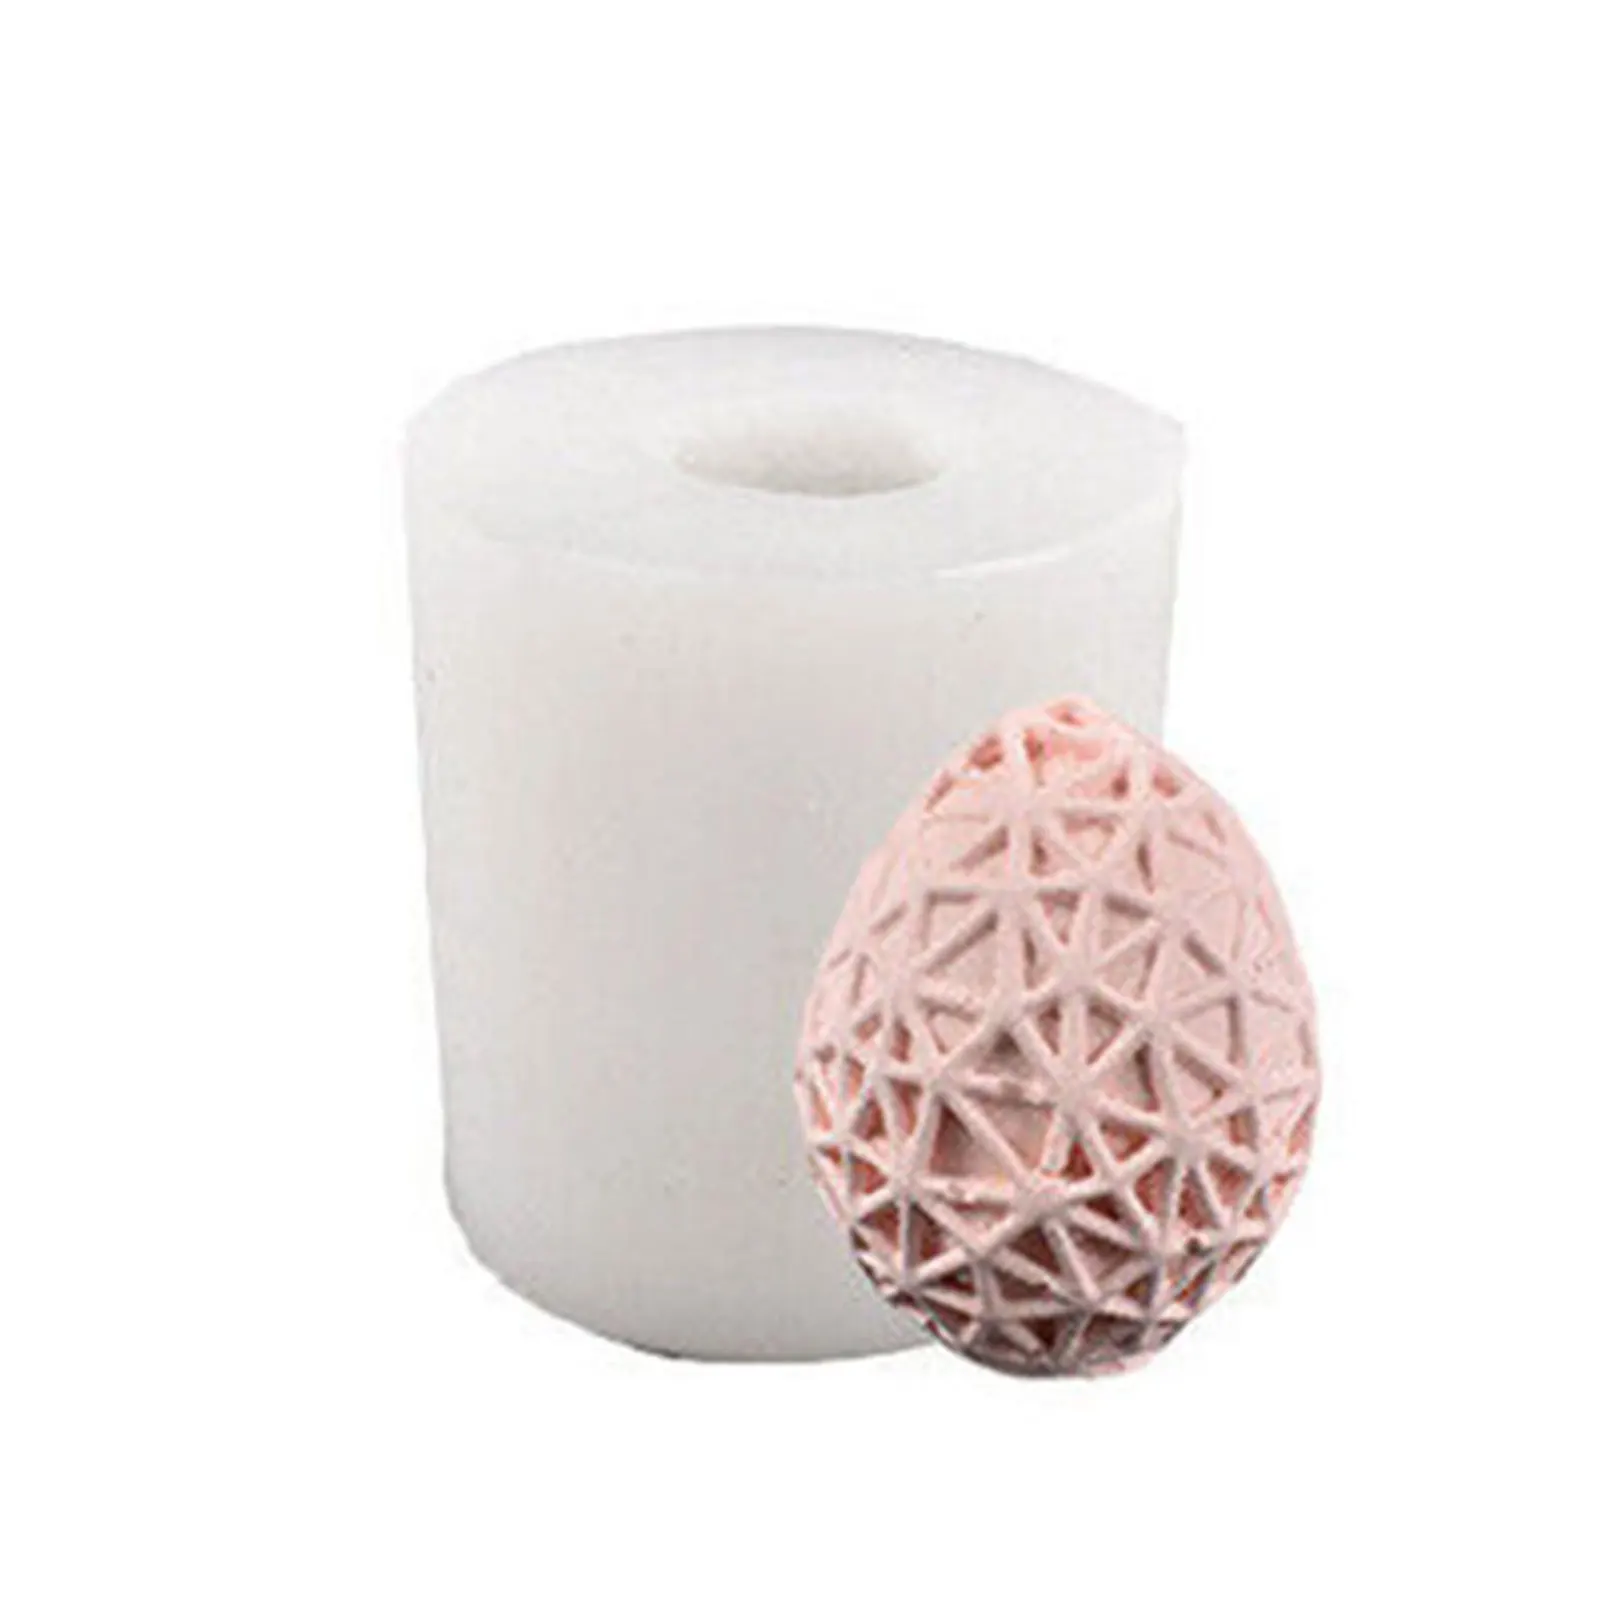 

Easter Eggs Silicone Candle Mold 3D Lace Decor DIY Mold Flower Ball Candle Frangipani Handmade Home Decor Gifts